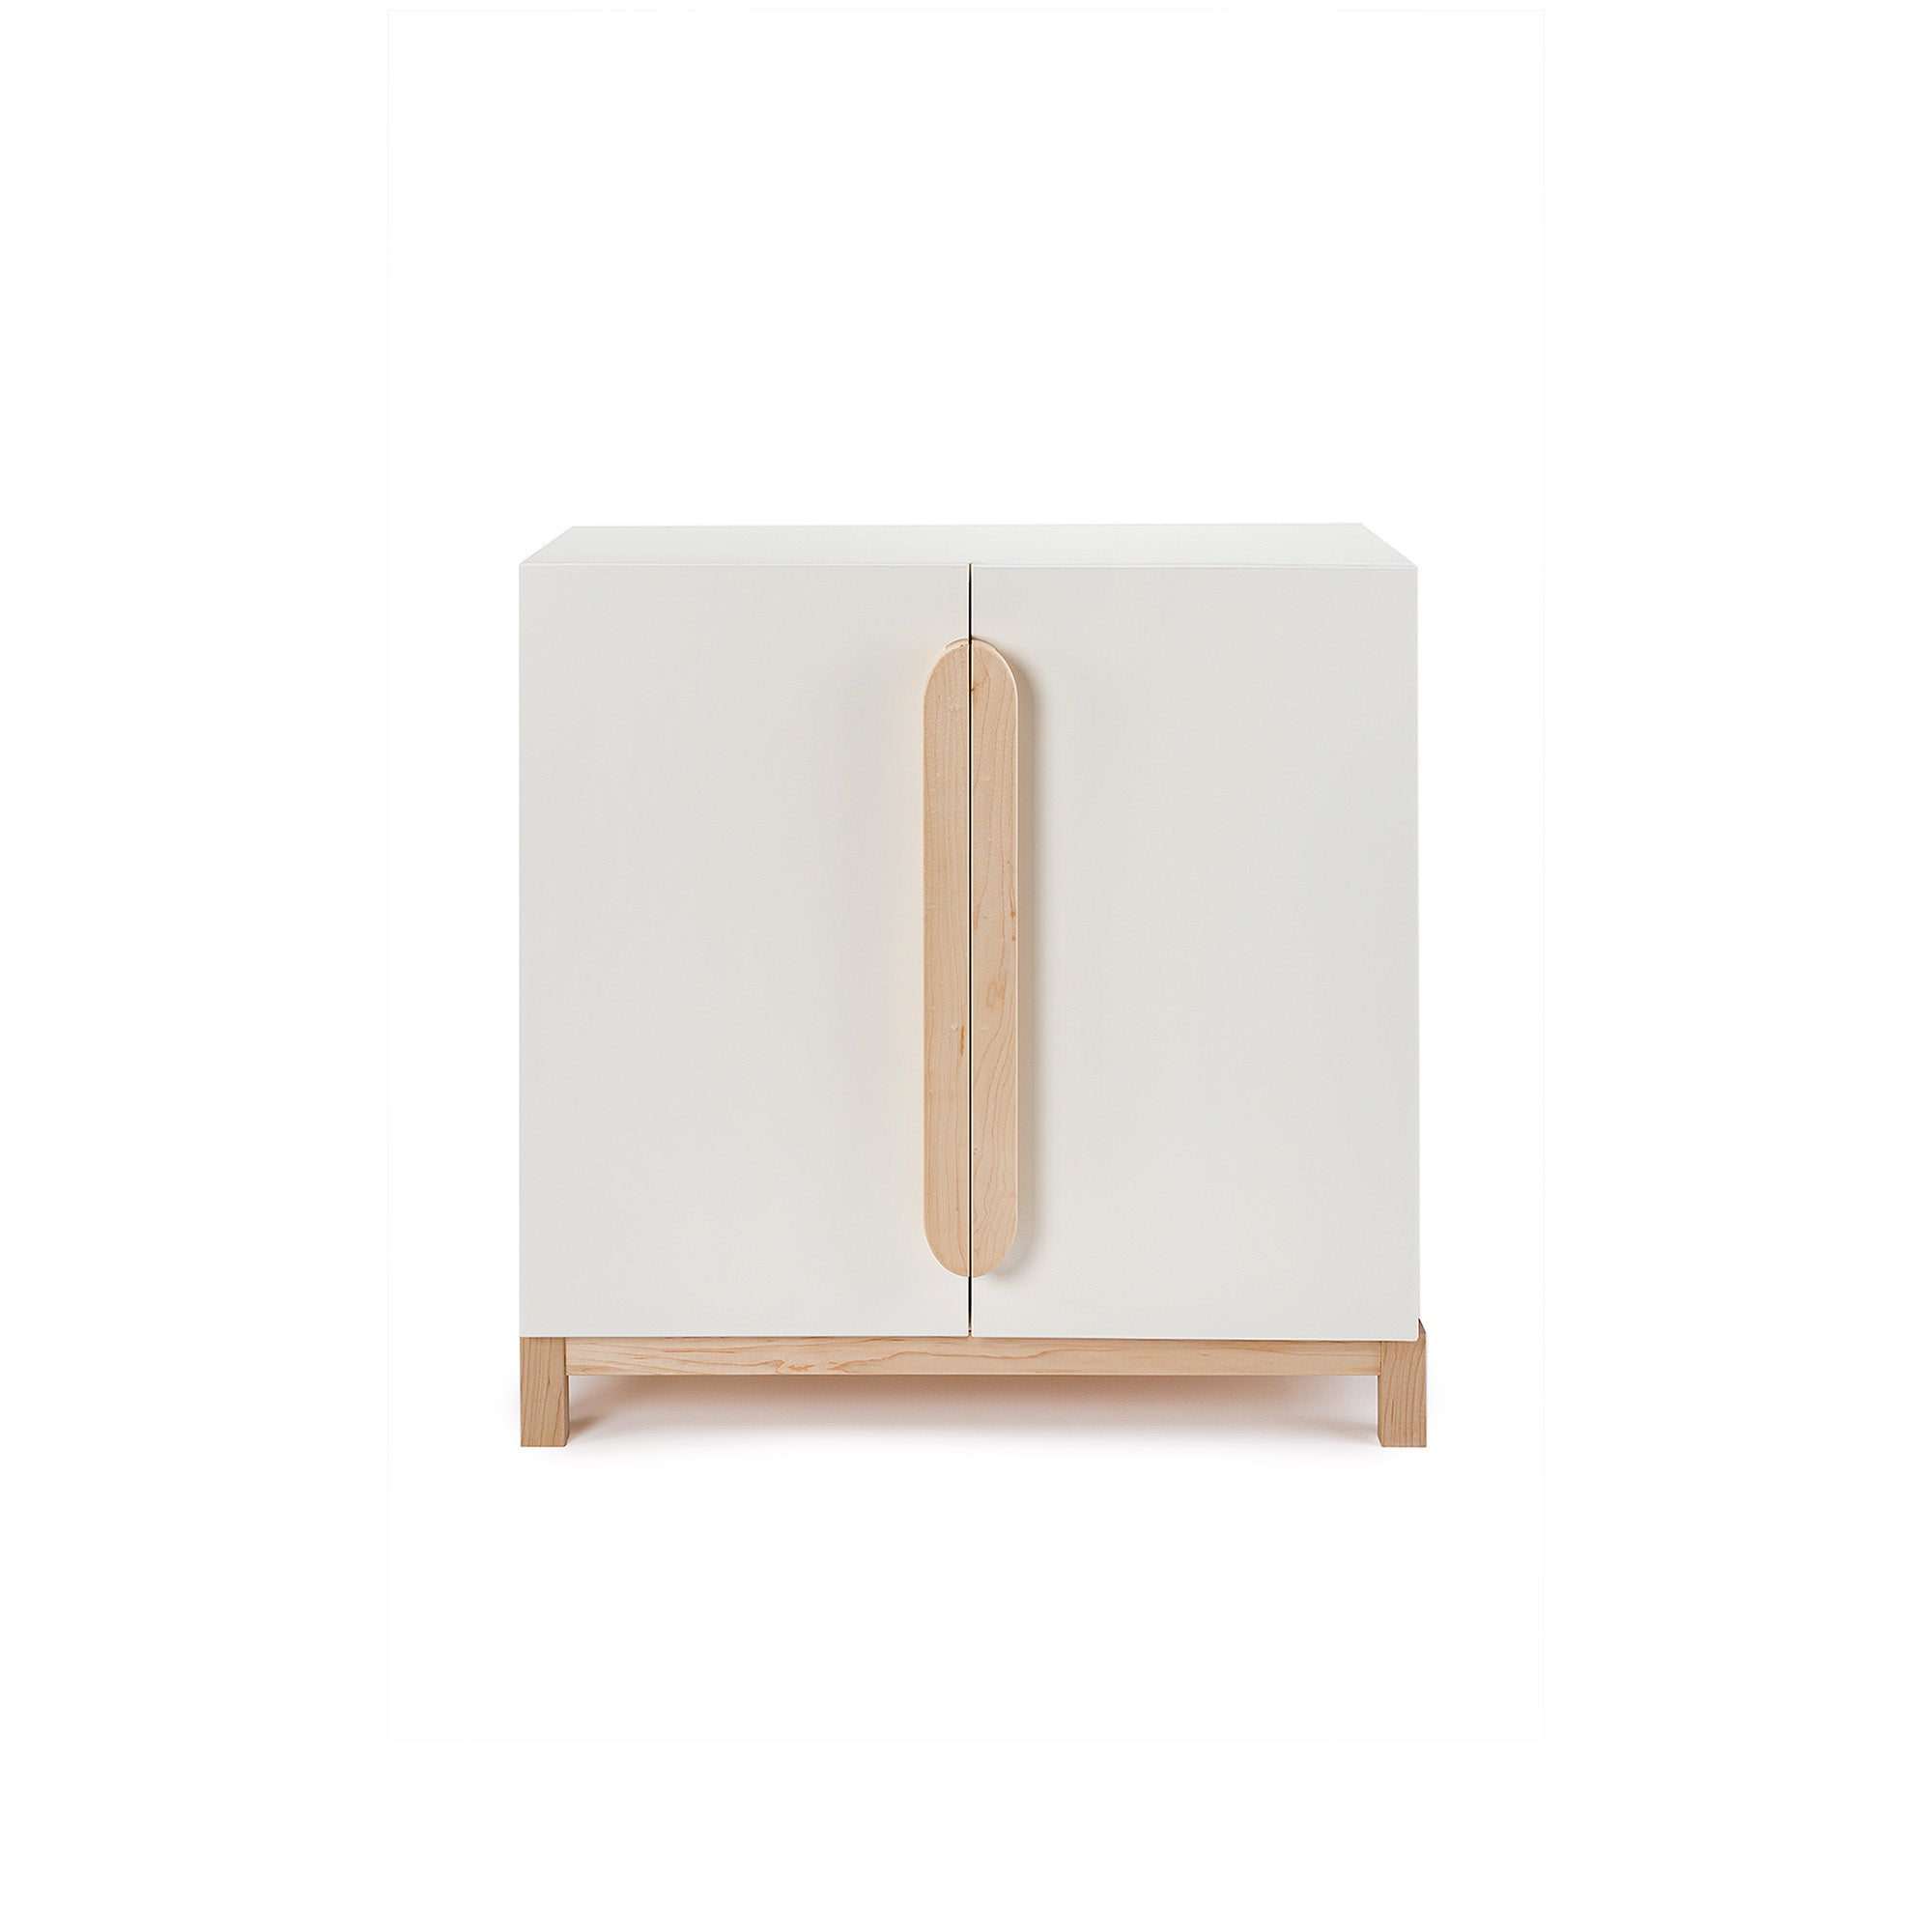 Playroom storage cabinet in white. Built with solid baltic birch plywood and non-toxic finishes. Stands at 30 inches and has 2 soft close doors.